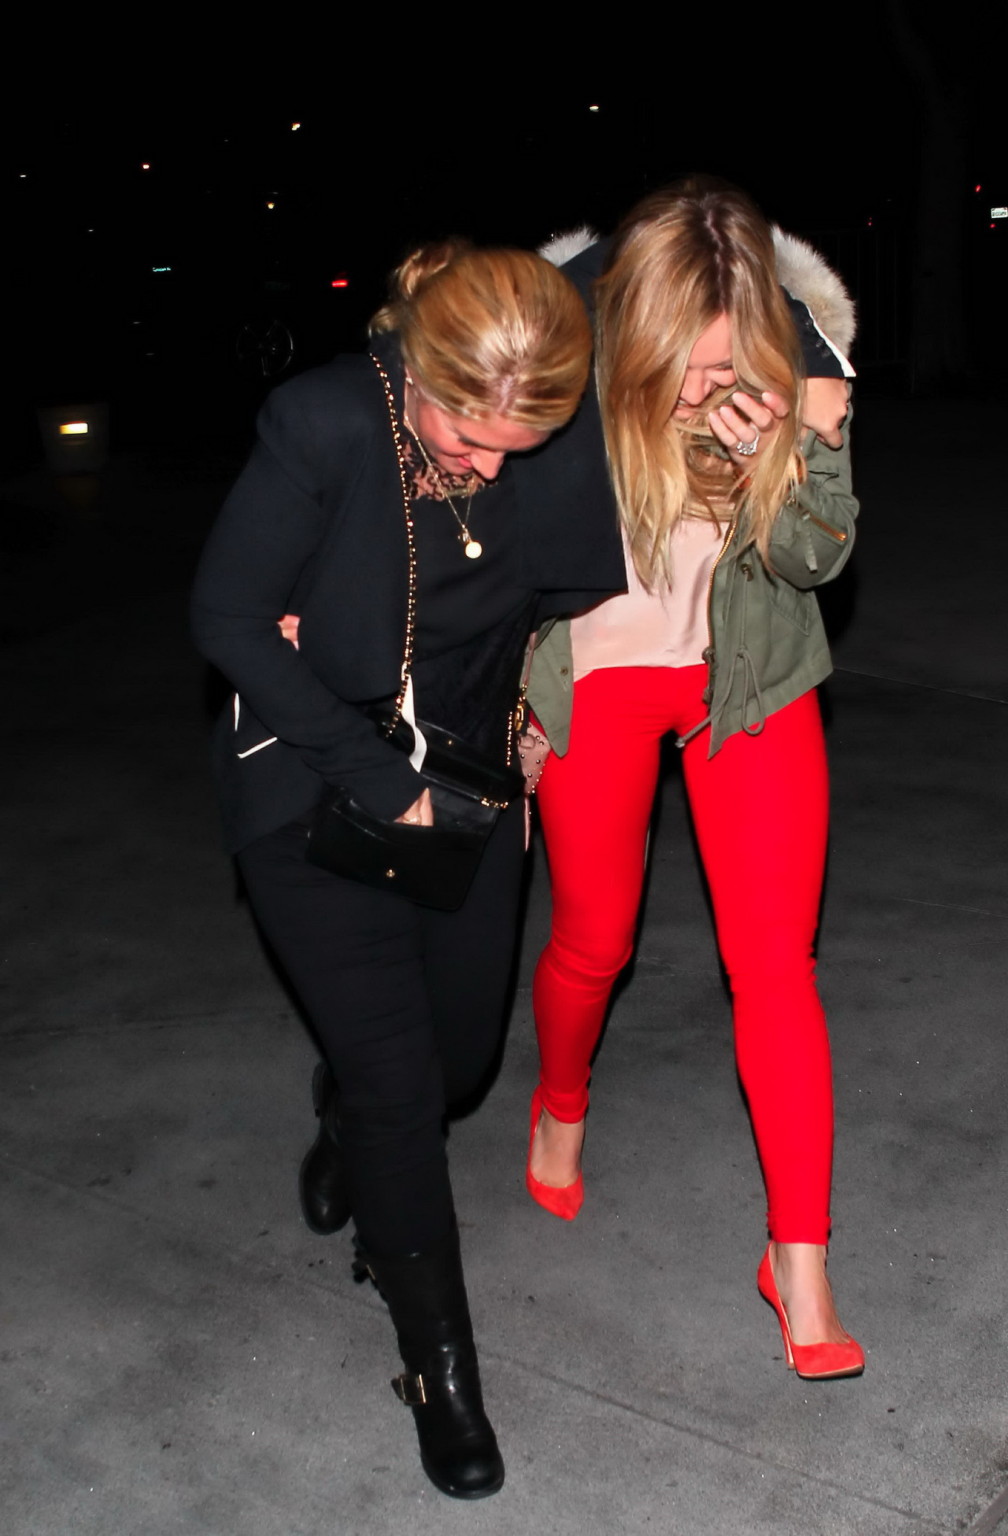 Hilary Duff wearing tank top and red tights leaving Pink concert at the Staples  #75215896